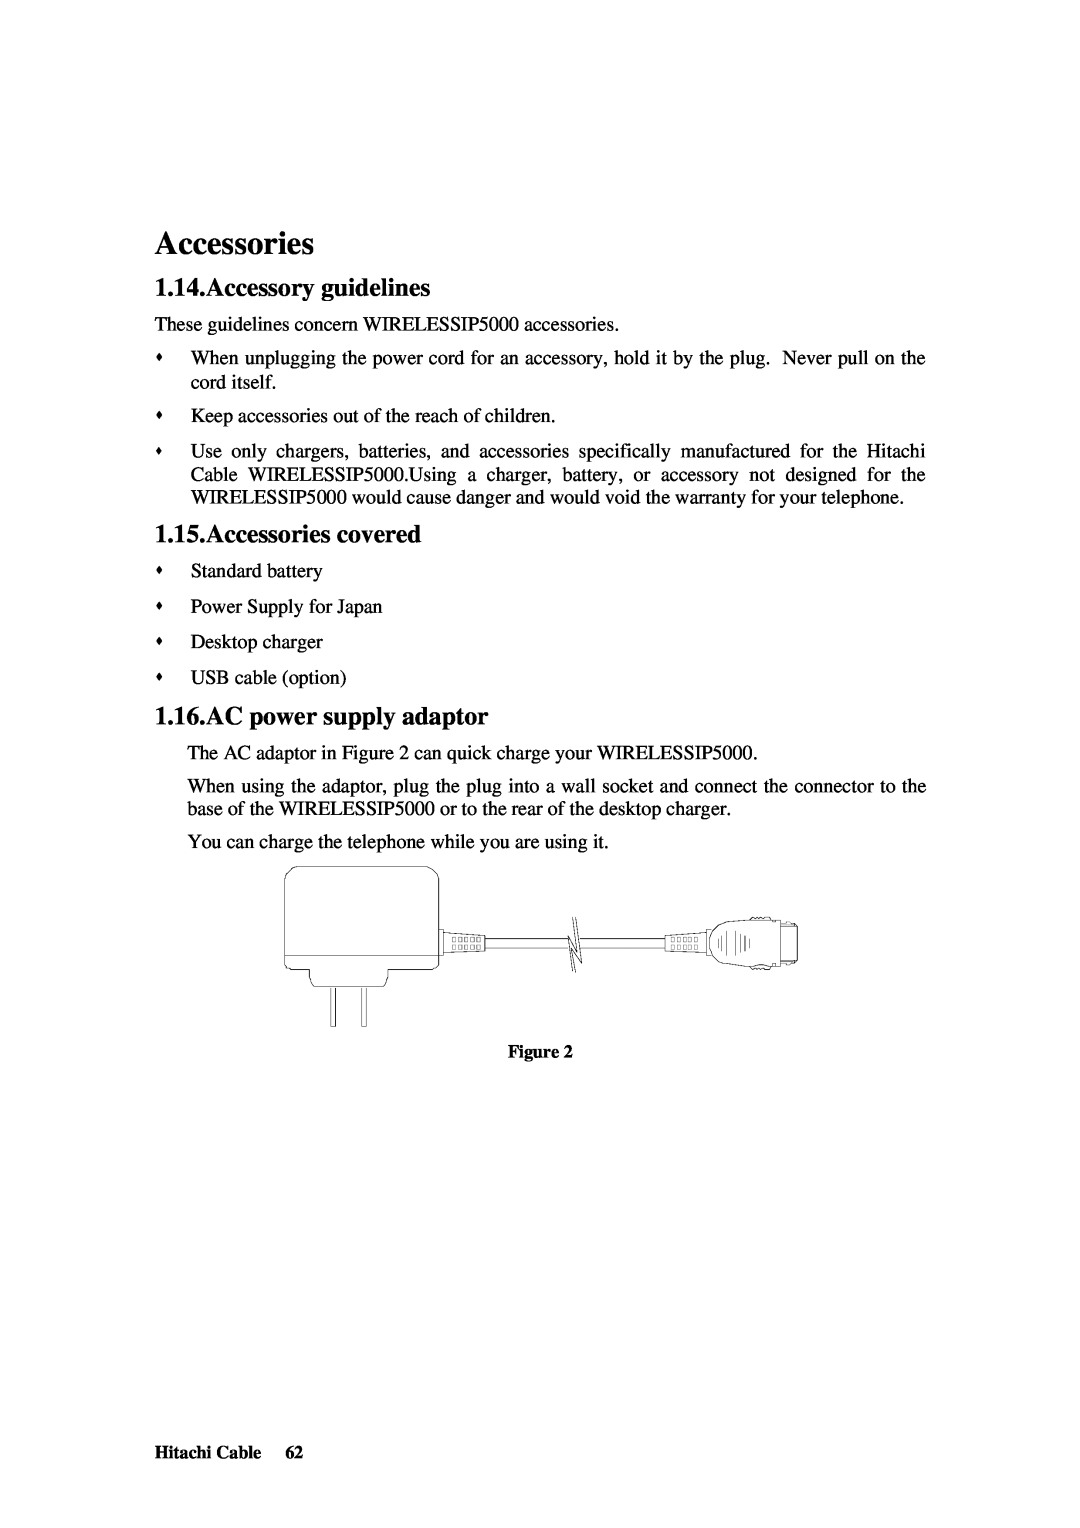 Hitachi TD61-2472 user manual Accessory guidelines, Accessories covered, AC power supply adaptor 